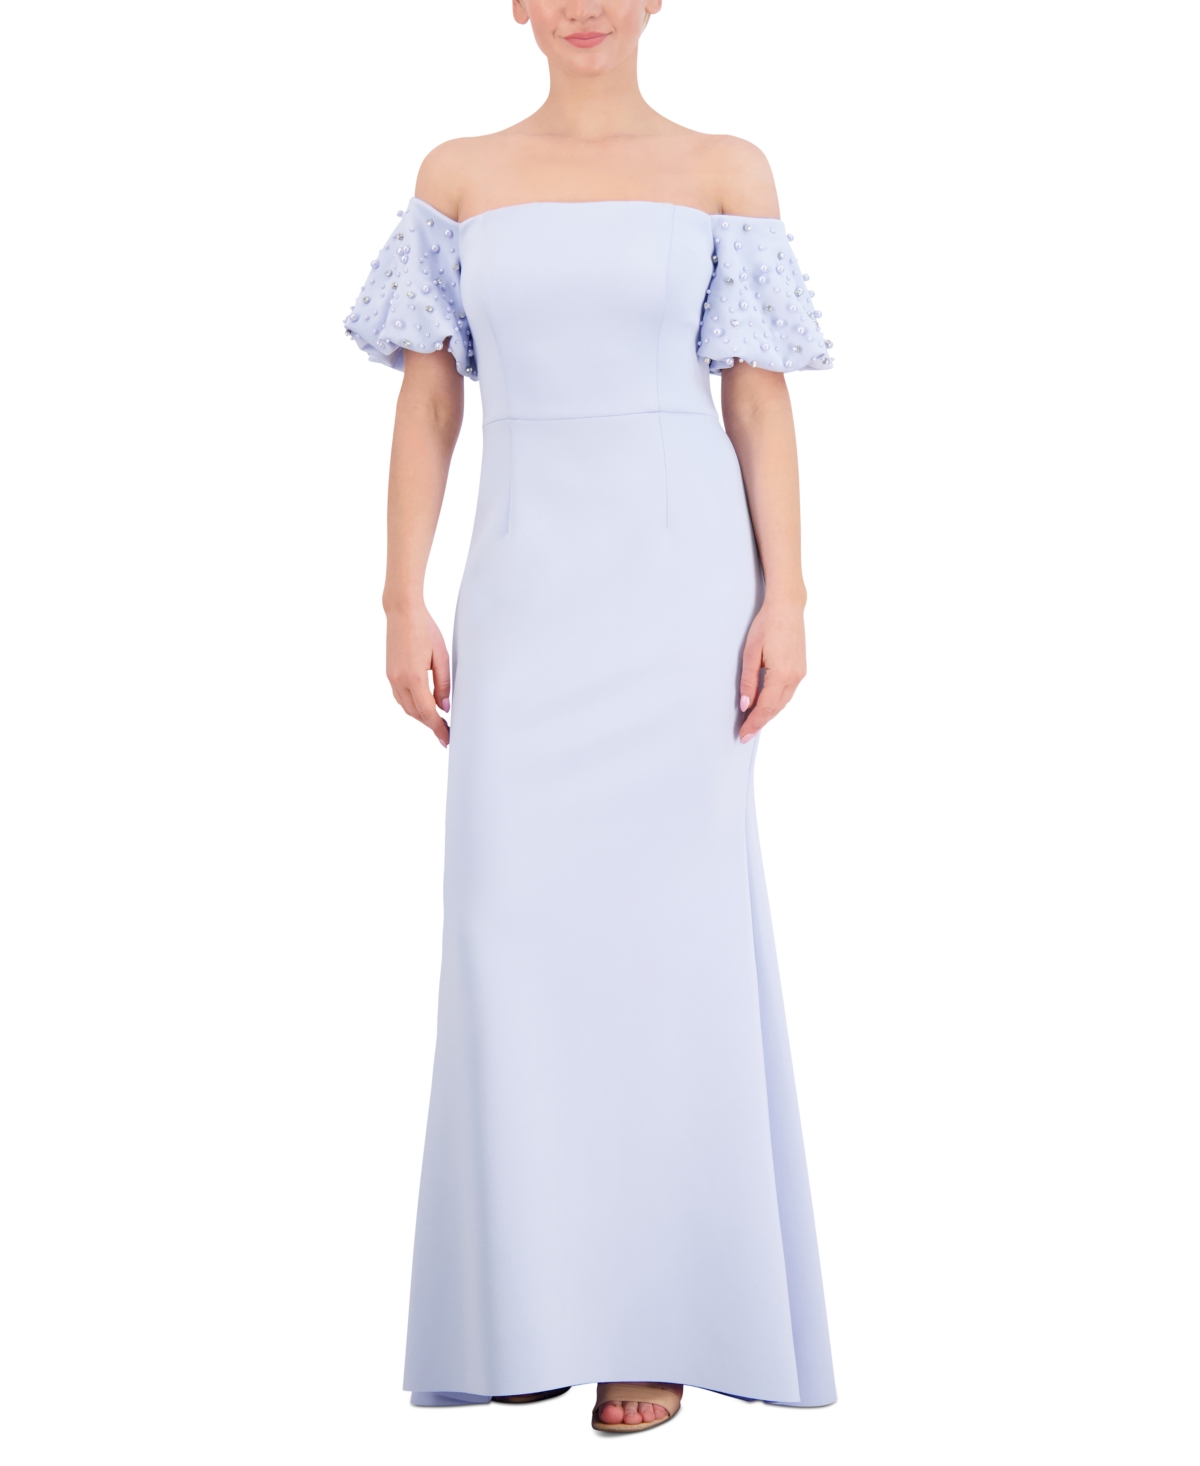 Women's Off-The-Shoulder Imitation Pearl Puff-Sleeve Gown - Periwinkle